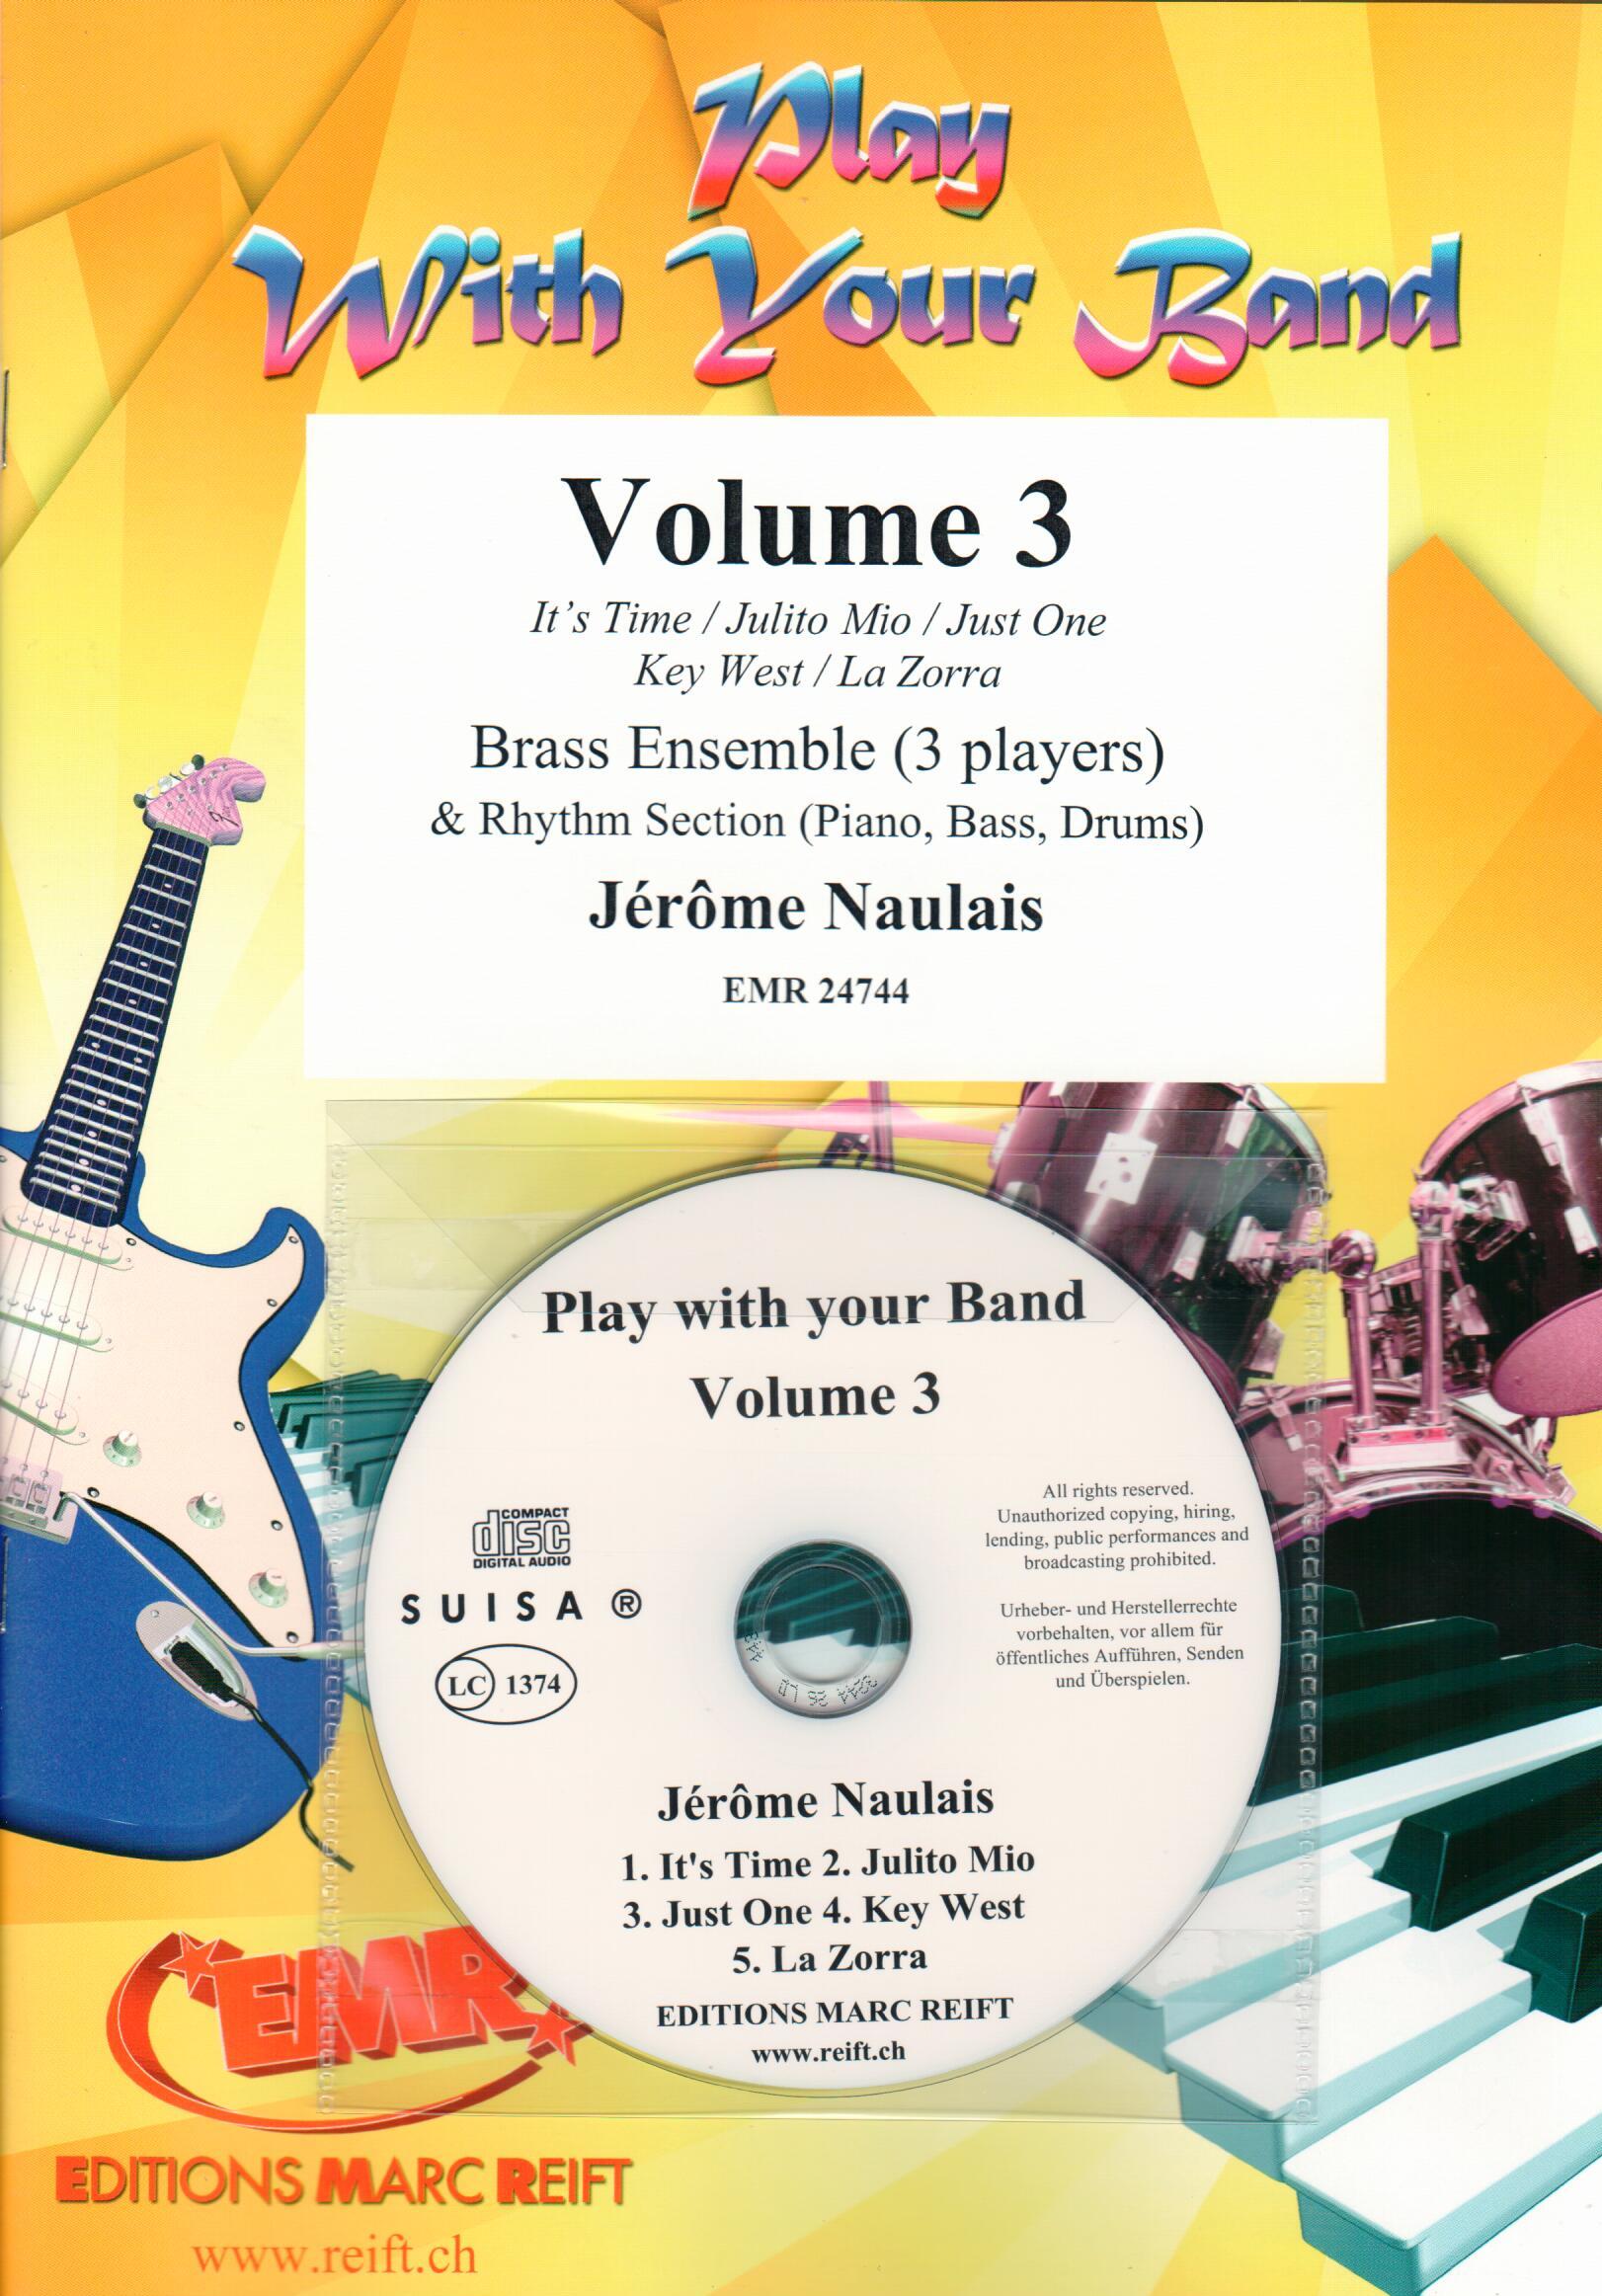 PLAY WITH YOUR BAND VOLUME 3, Trios